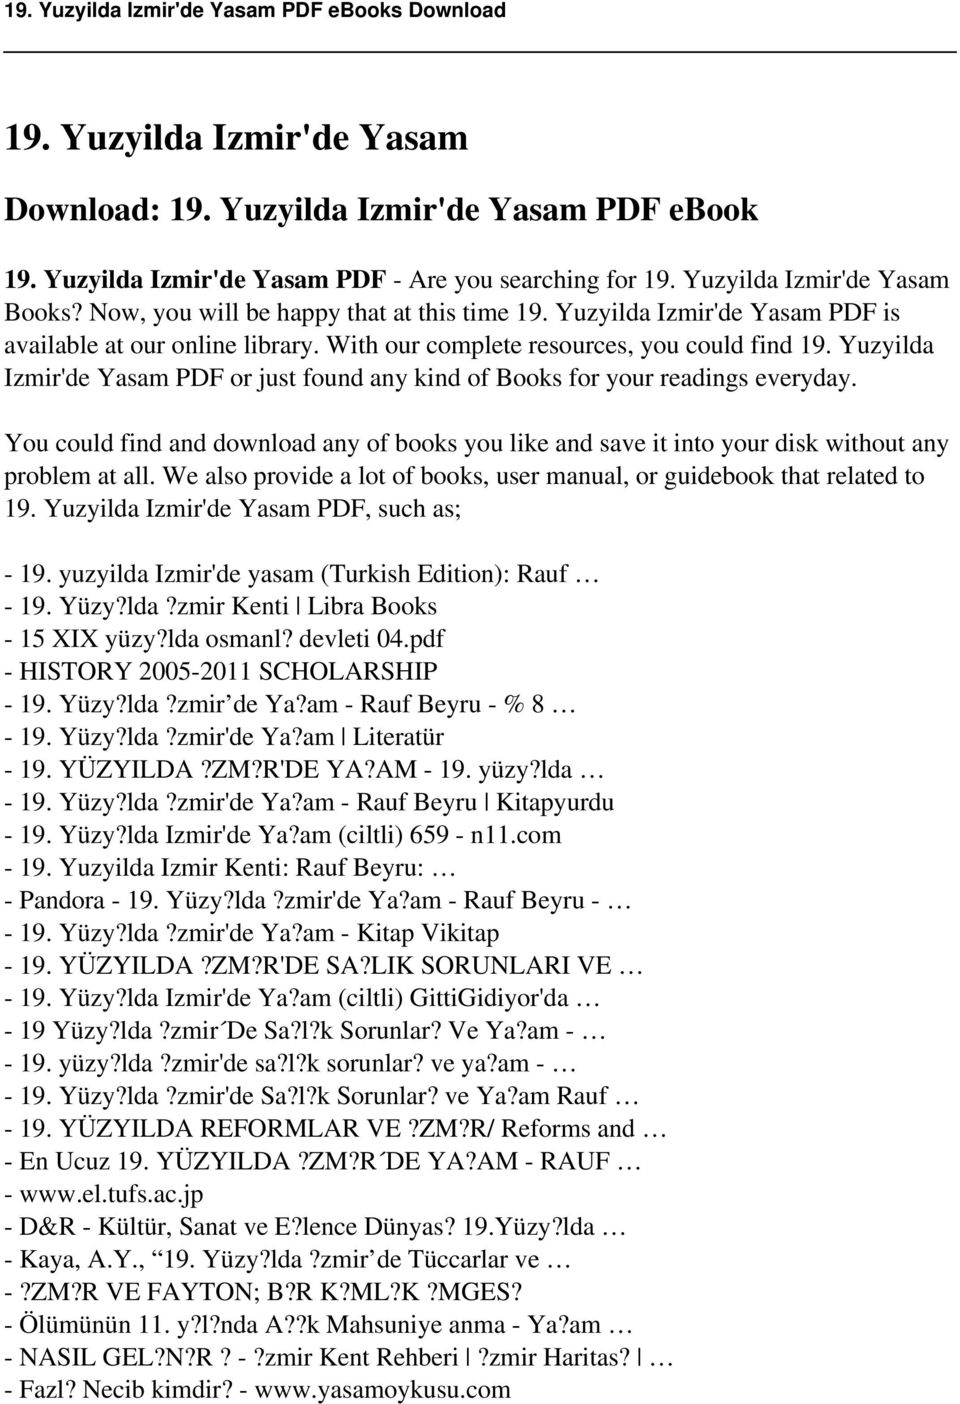 Yuzyilda Izmir'de Yasam PDF or just found any kind of Books for your readings everyday. You could find and download any of books you like and save it into your disk without any problem at all.